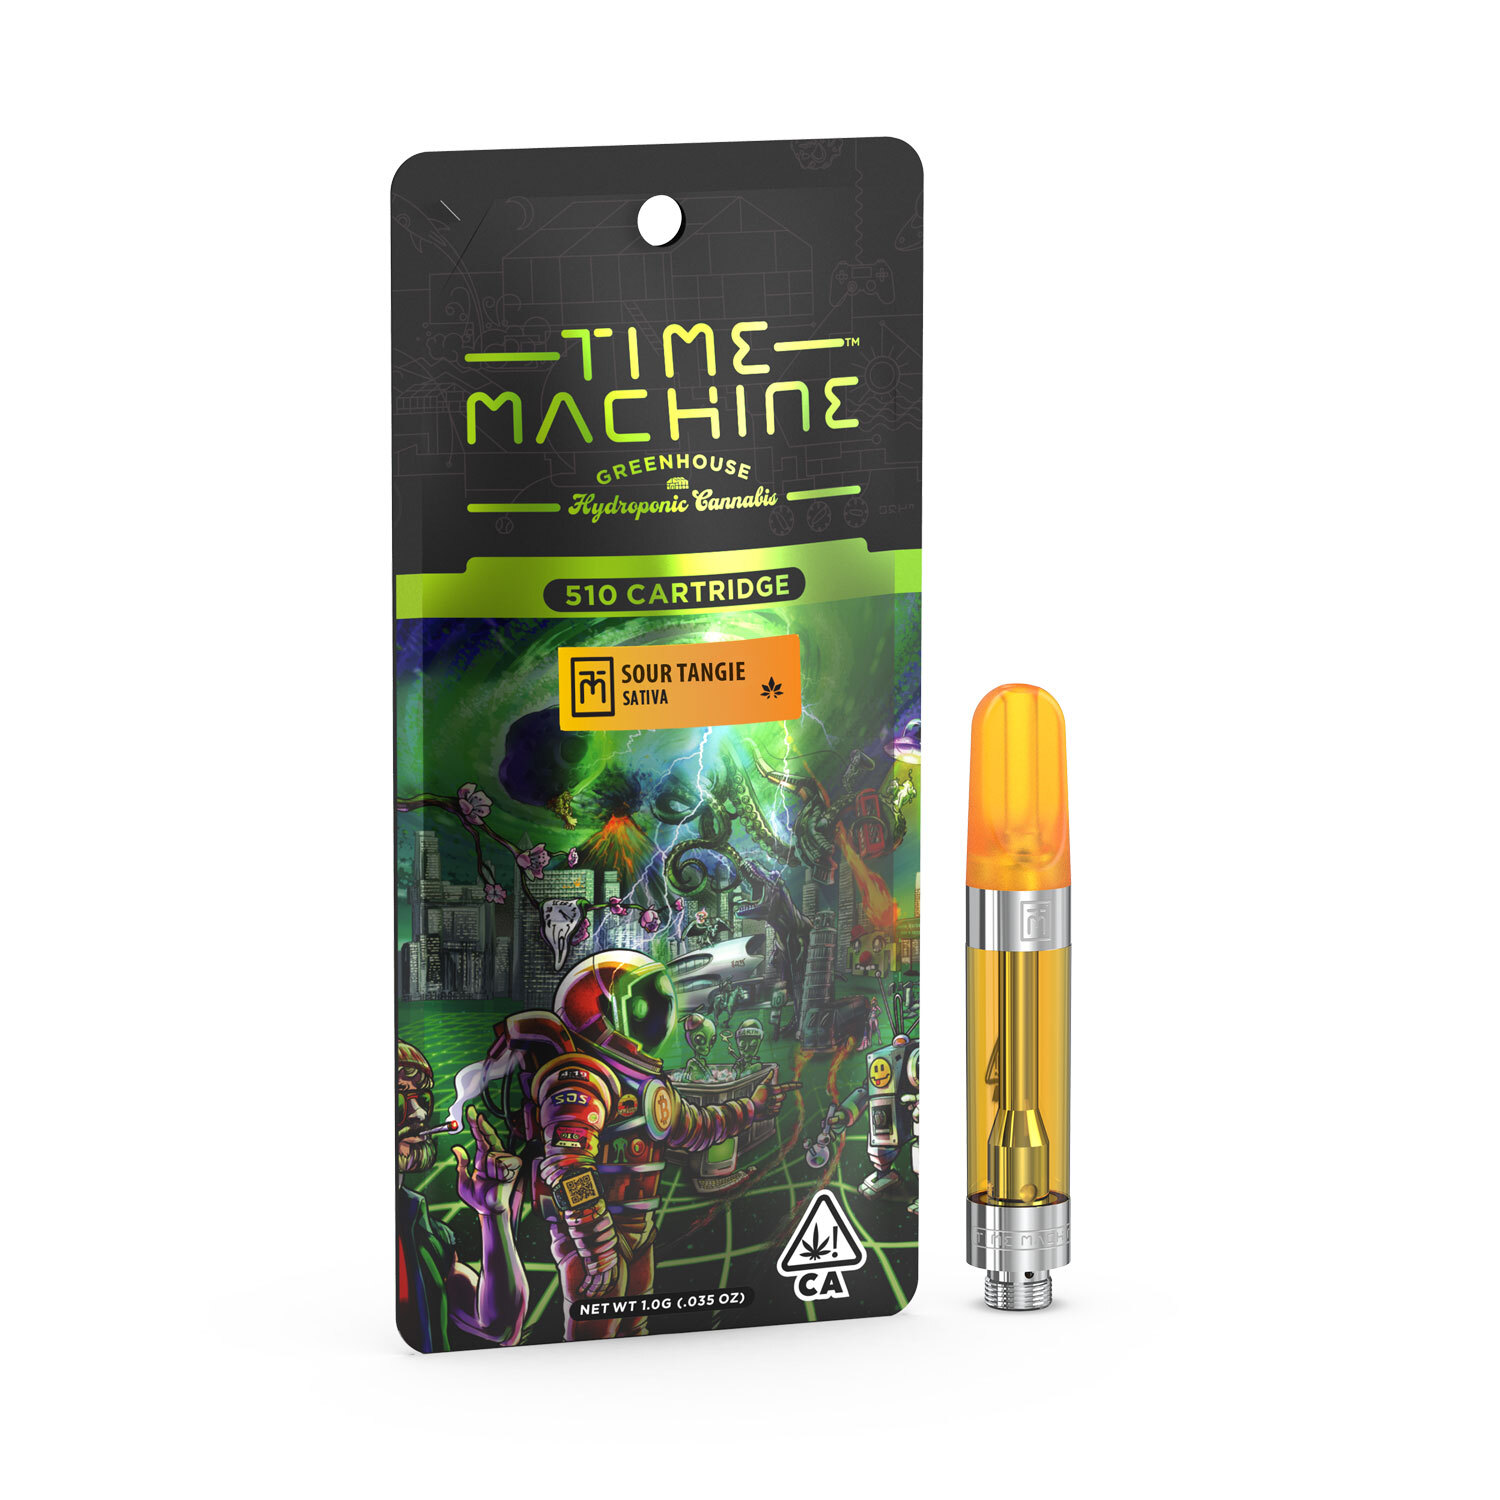 A photograph of Time Machine Cartridge 1g Sour Tangie